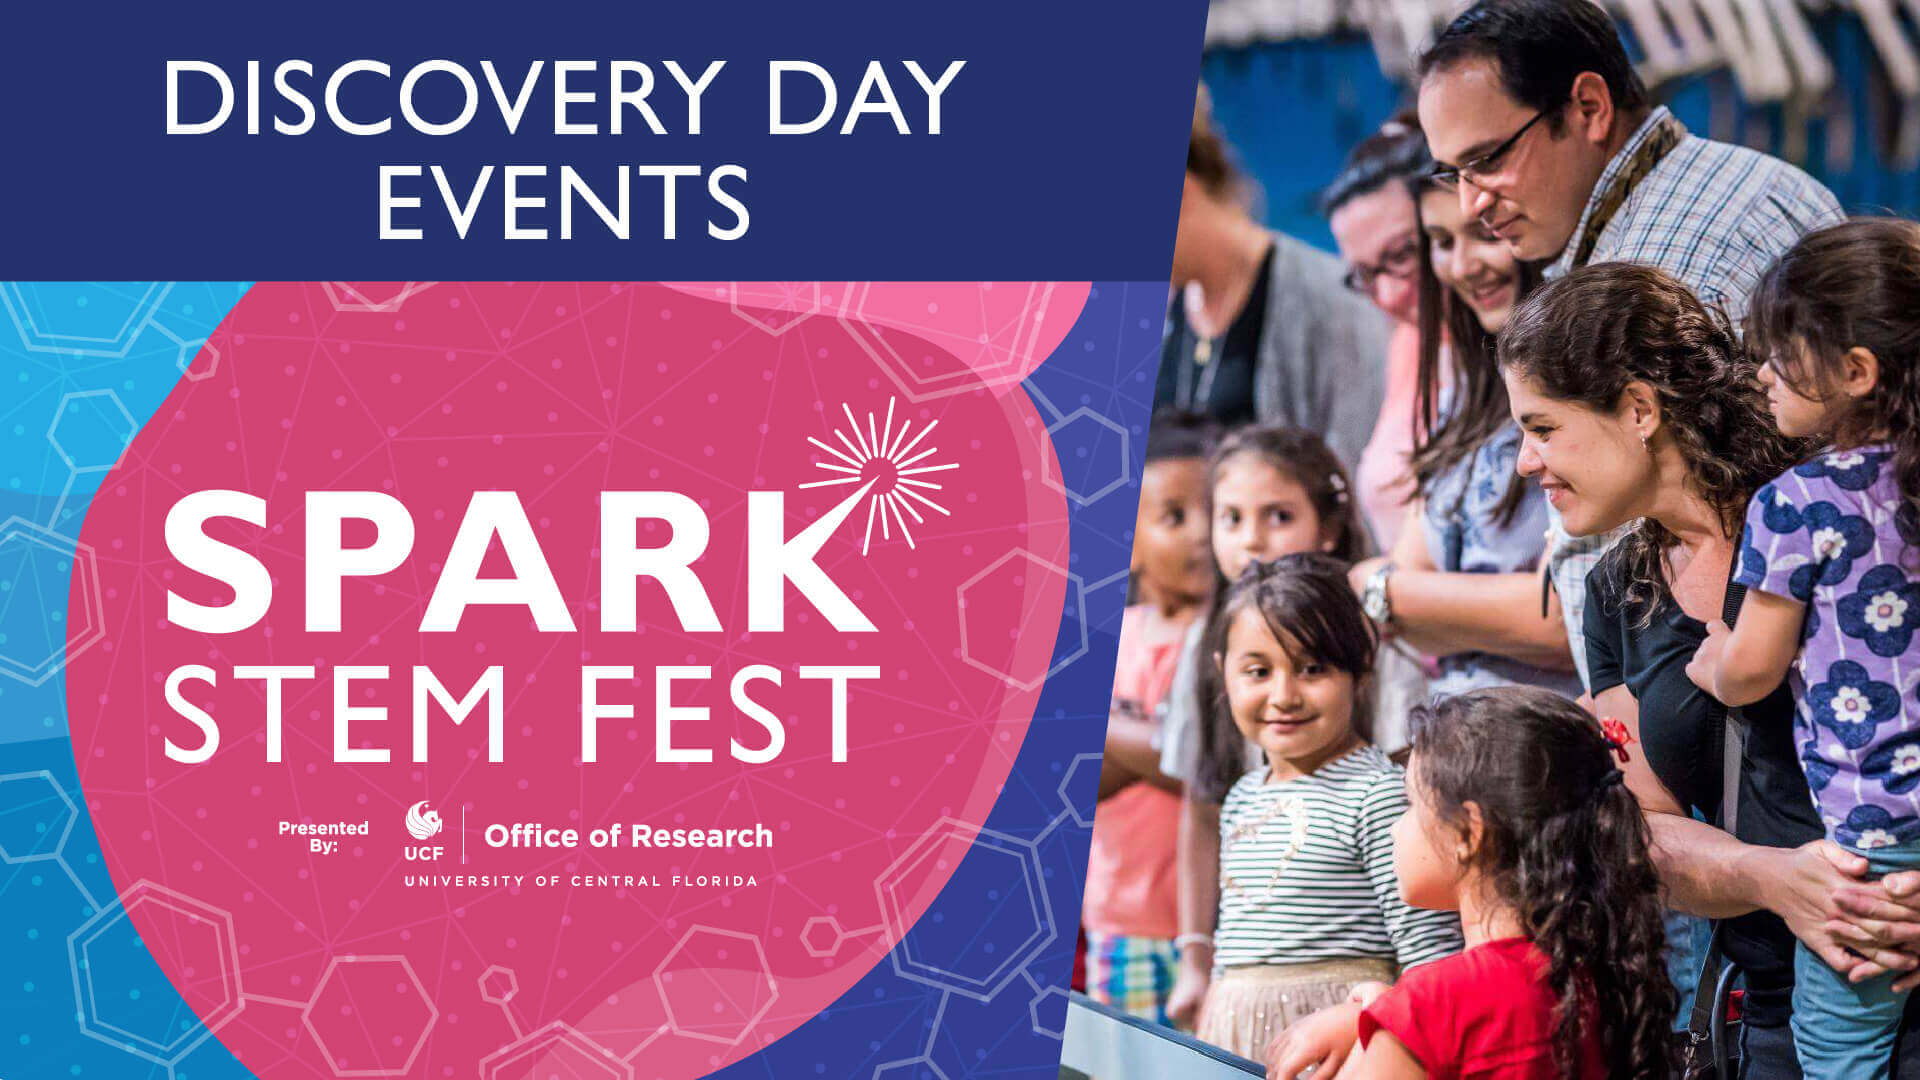 Discovery Day Events: Spark STEM Fest – Presented by UCF, Office of Research